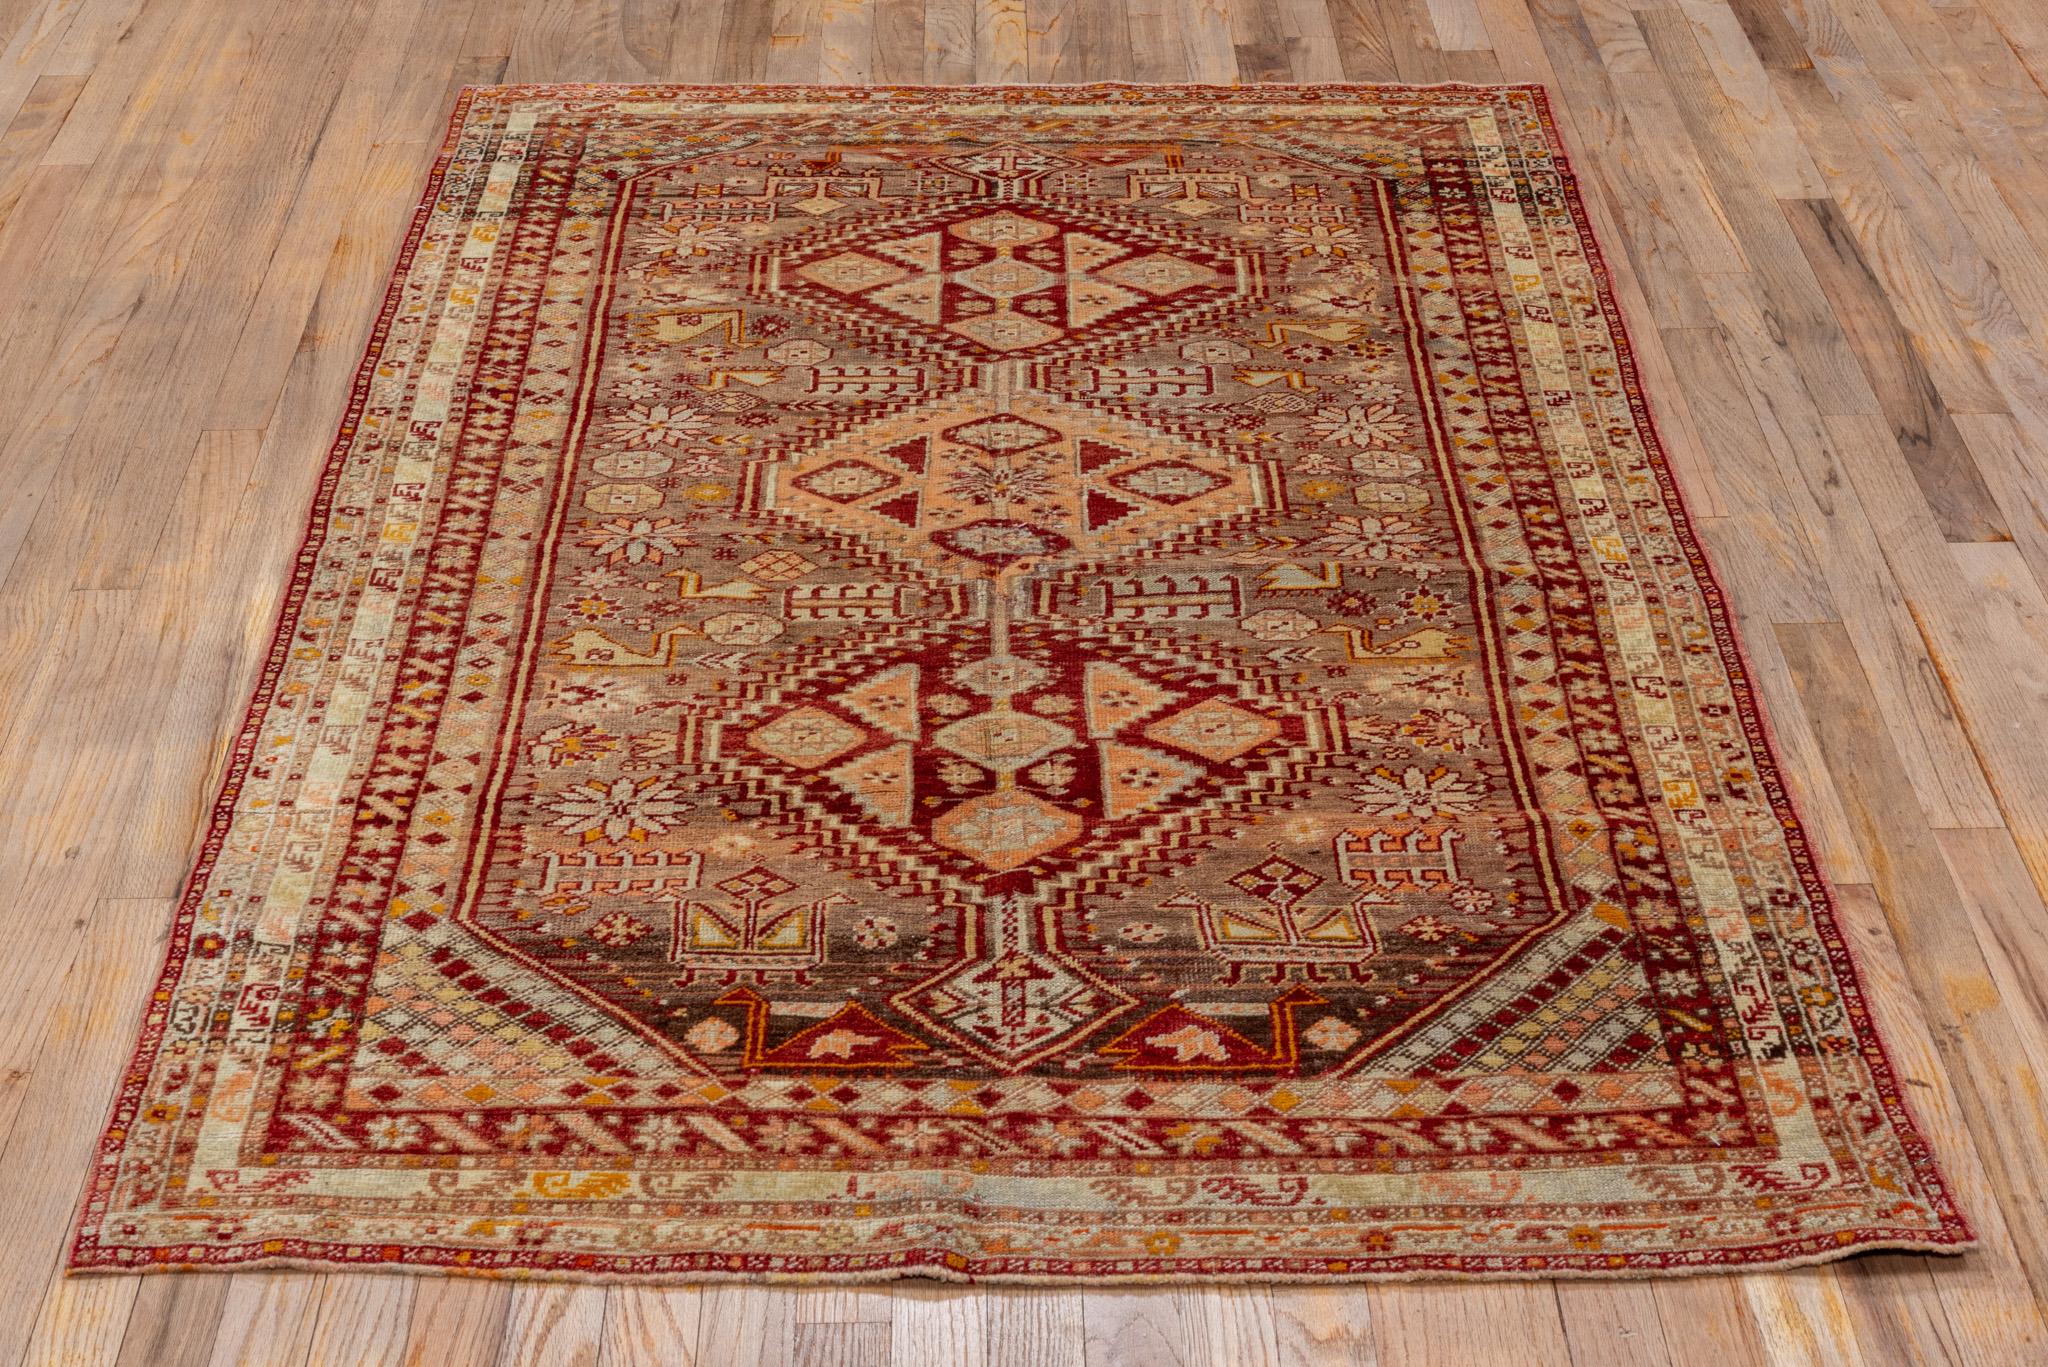 A Sivas Rug circa 1920. Handknotted with 100% wool yarn.